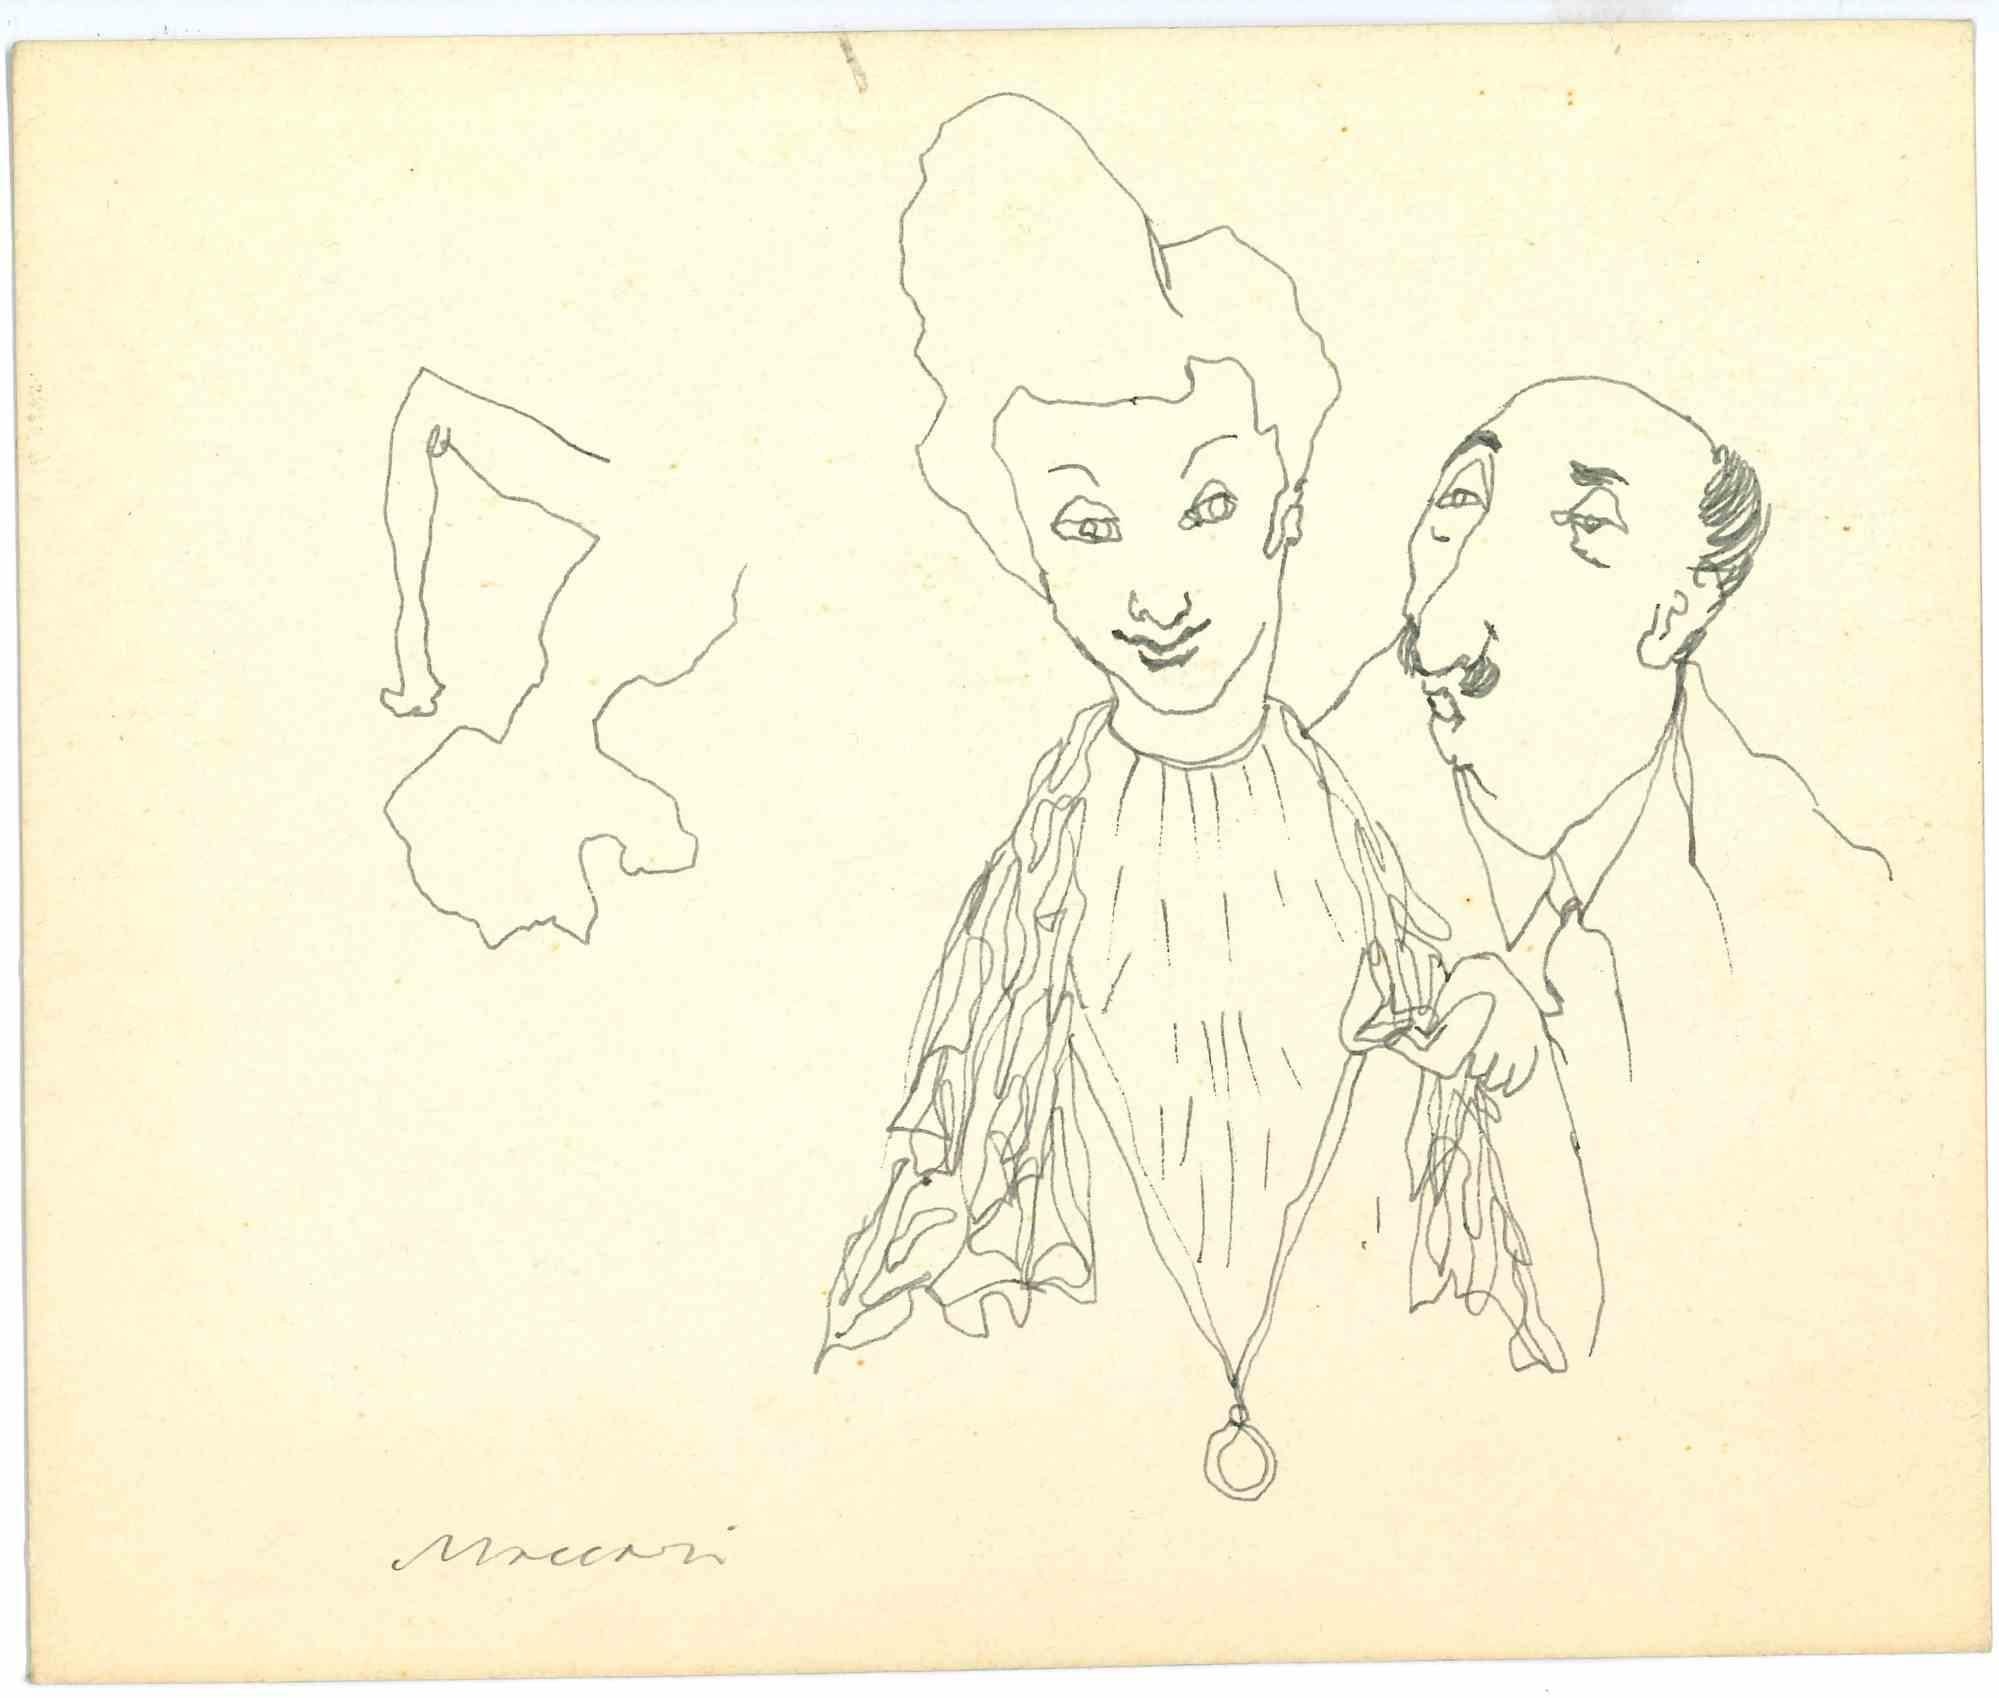 The Couple is a Pen Drawing realized by Mino Maccari  (1924-1989) in the 1940s.

Hand-signed on the lower.

Good condition.

Mino Maccari (Siena, 1924-Rome, June 16, 1989) was an Italian writer, painter, engraver and journalist, winner of the